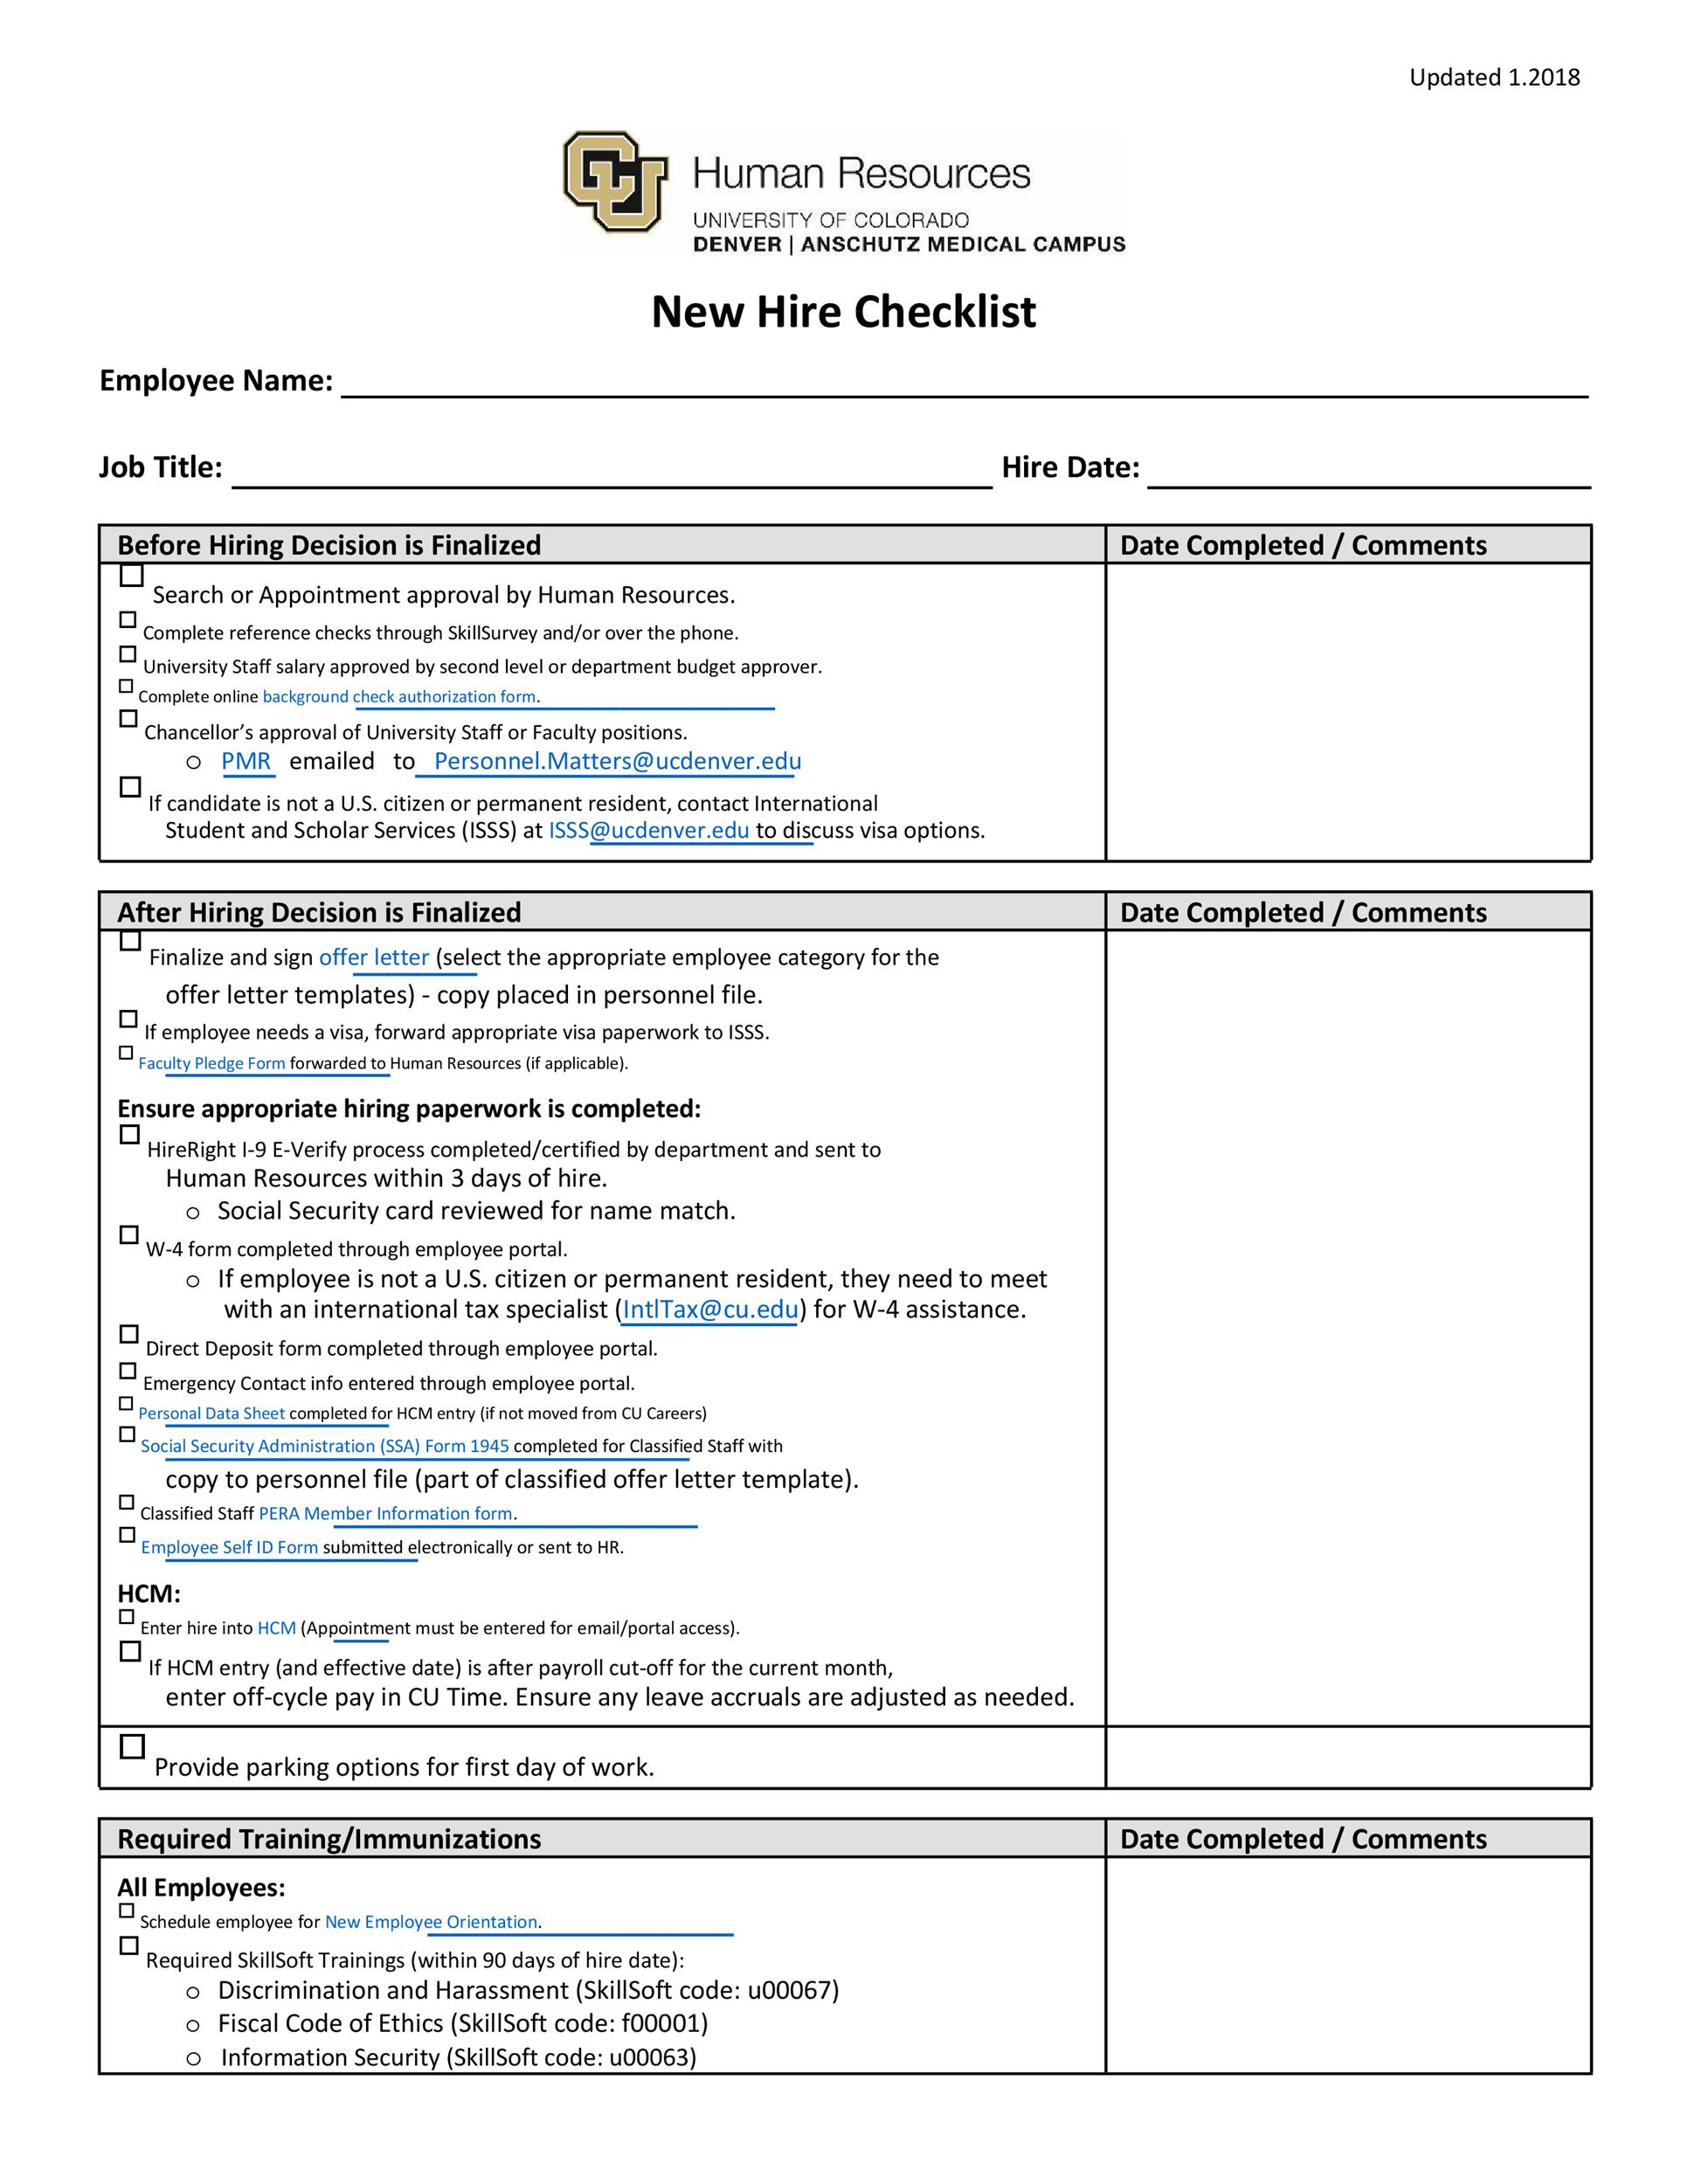 11 Useful New Hire Checklist Templates & Forms ᐅ TemplateLab Intended For New Employee Onboarding Checklist Template In New Employee Onboarding Checklist Template